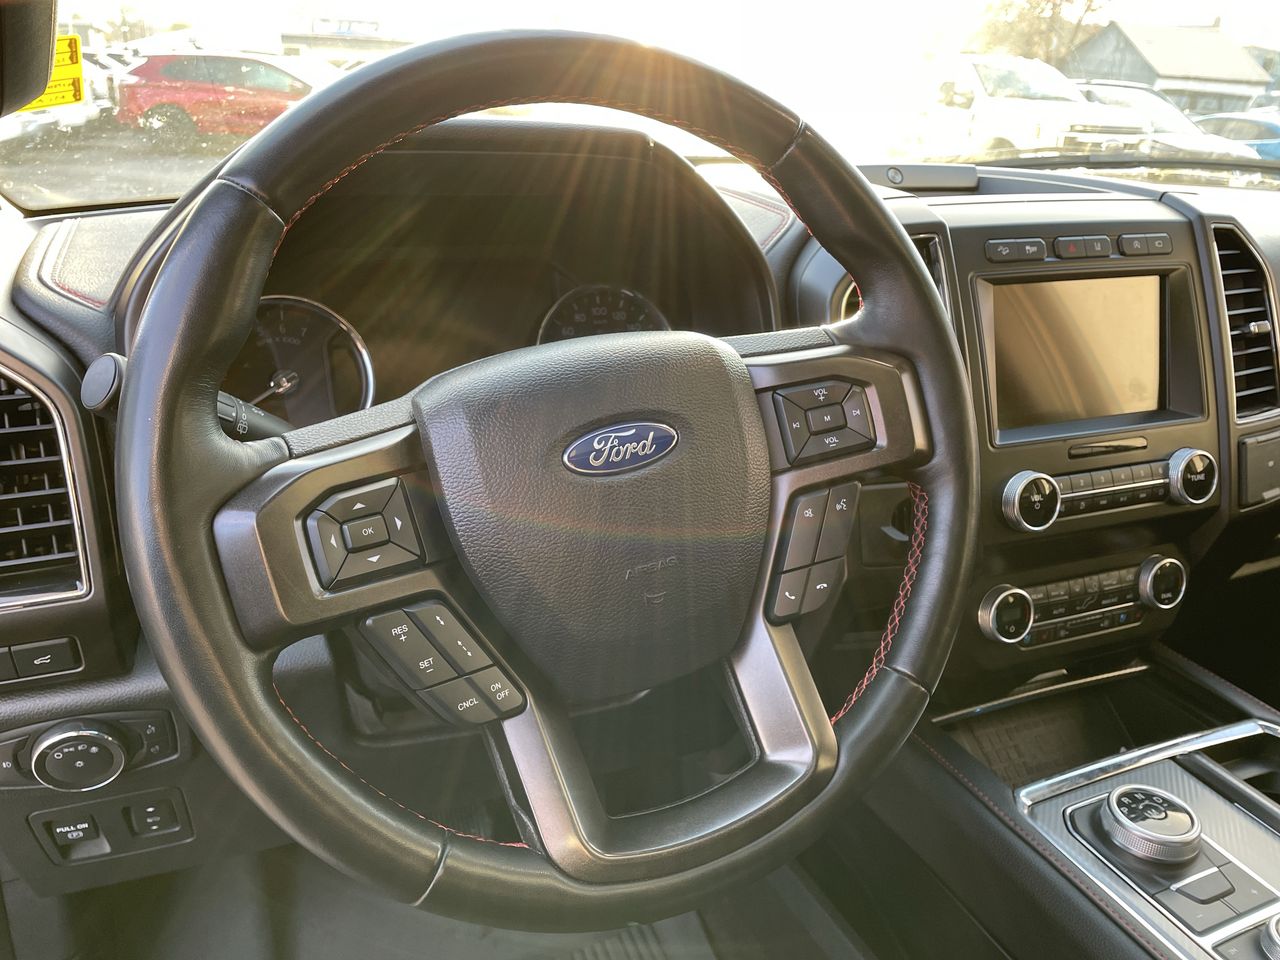 2021 Ford Expedition - 21452B Full Image 14